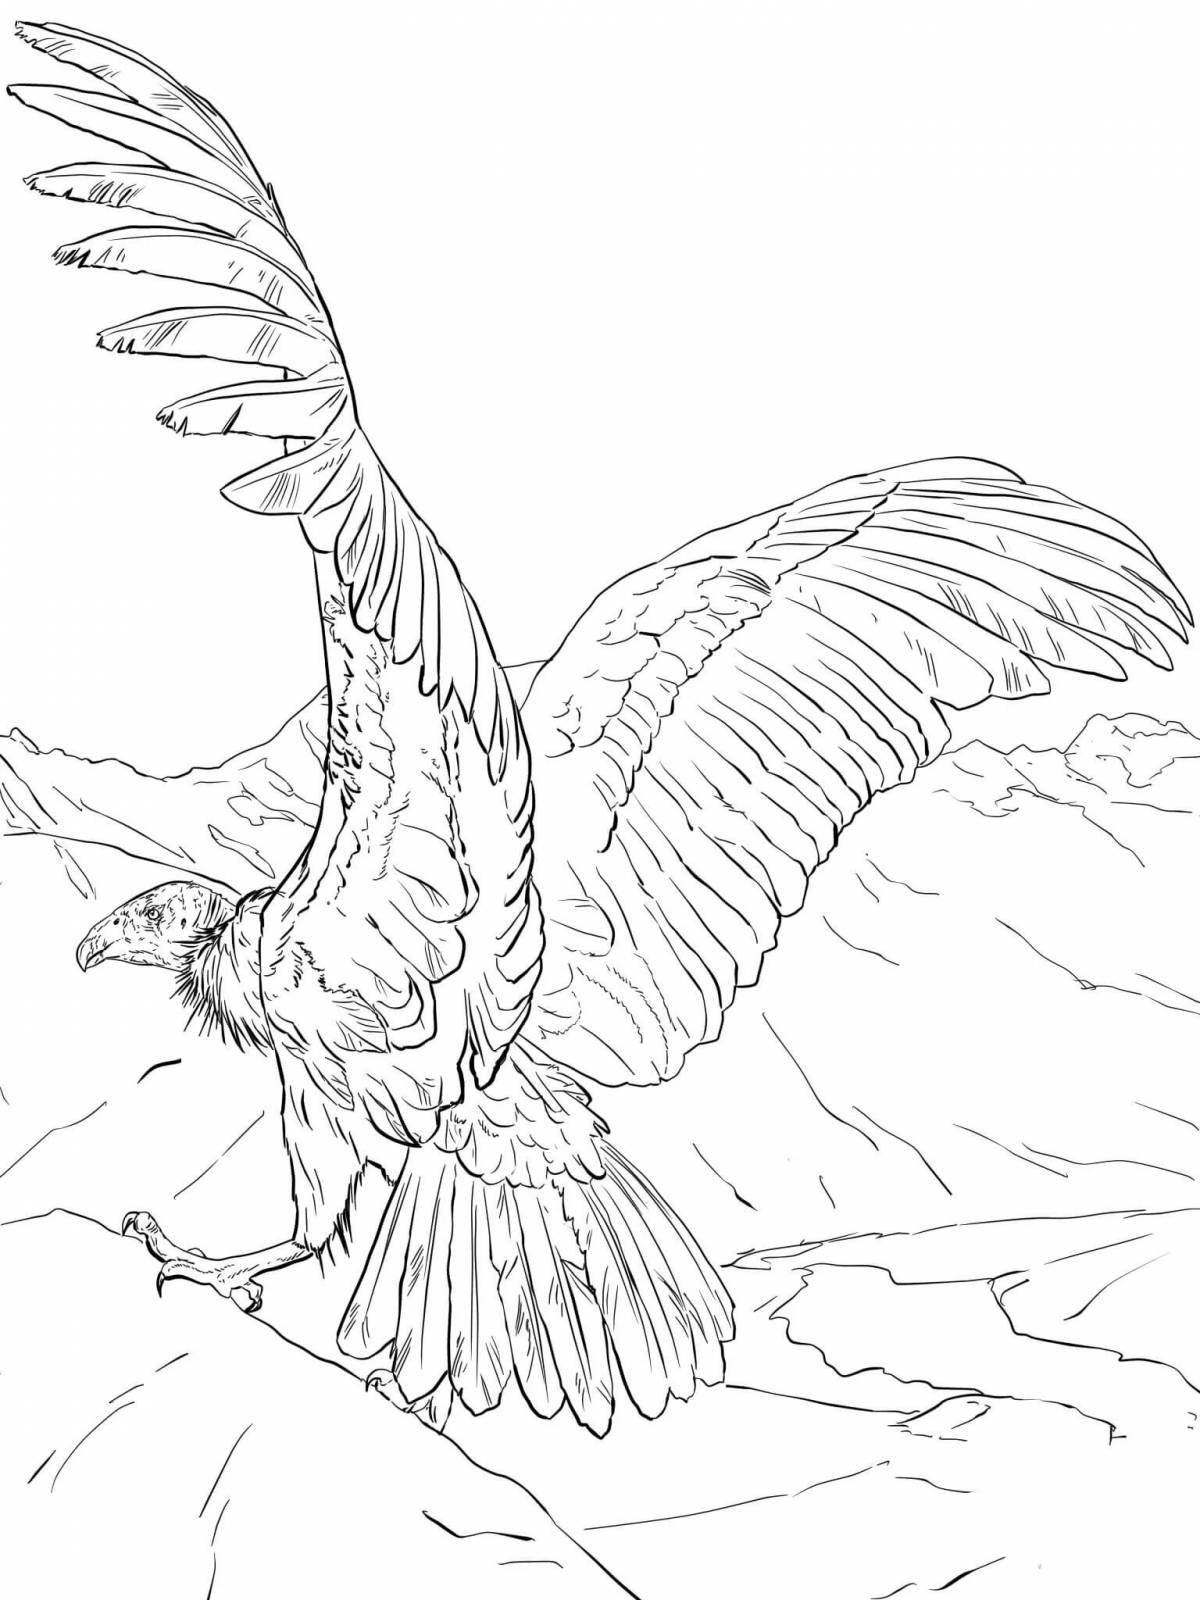 Fairy vulture coloring page